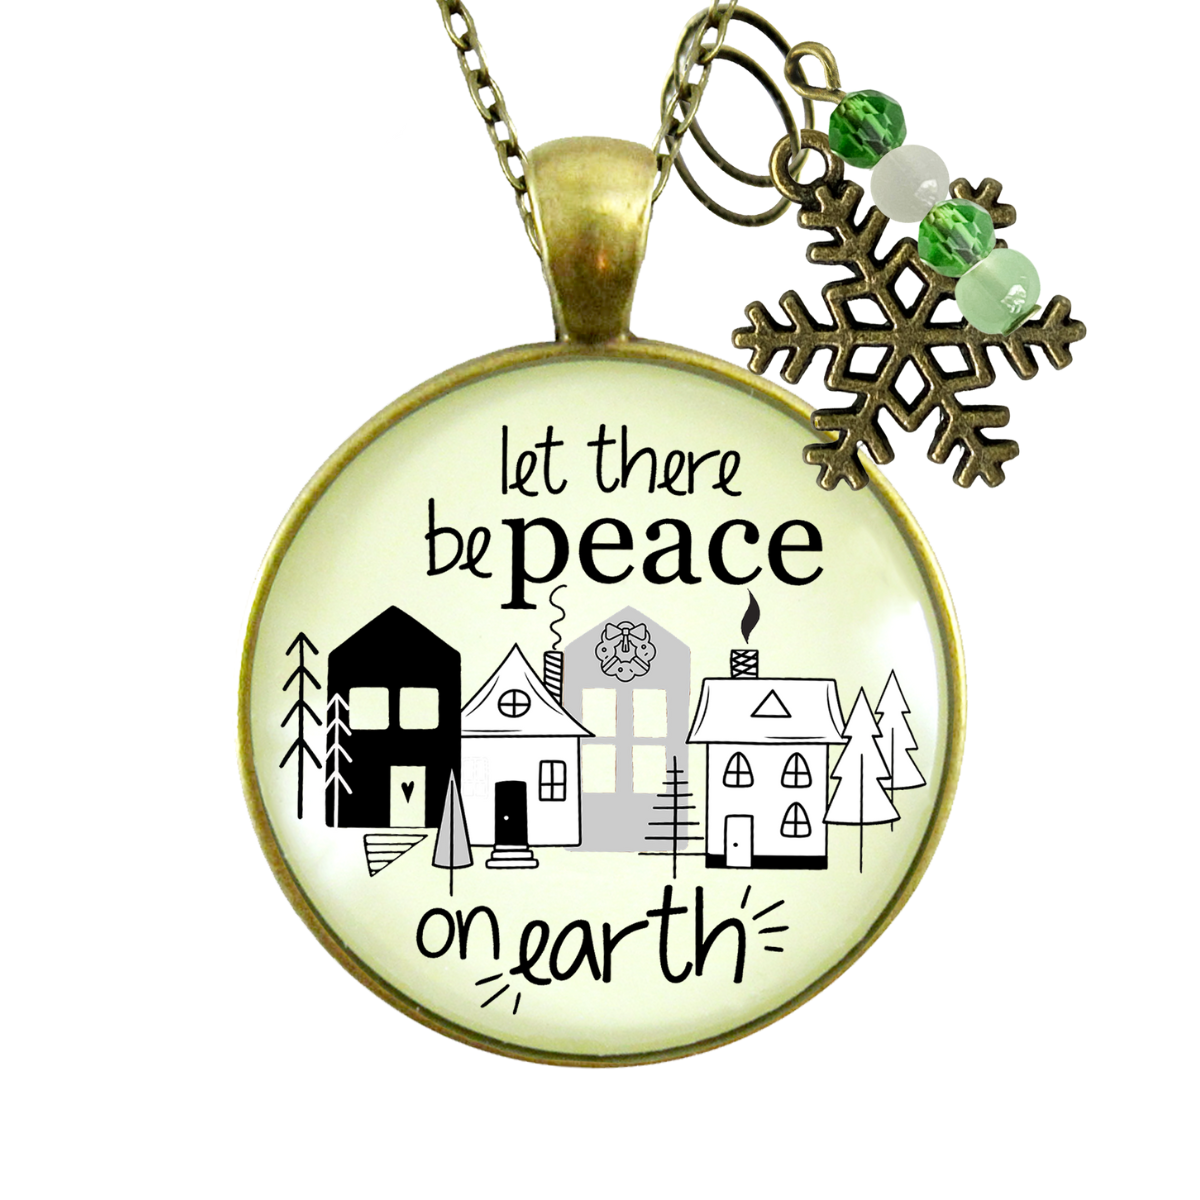 Christmas Village Let There Be Peace On Earth Necklace Handmade Winter Holidays Snowflake Charm Green Beads Jewelry  Necklace - Gutsy Goodness Handmade Jewelry